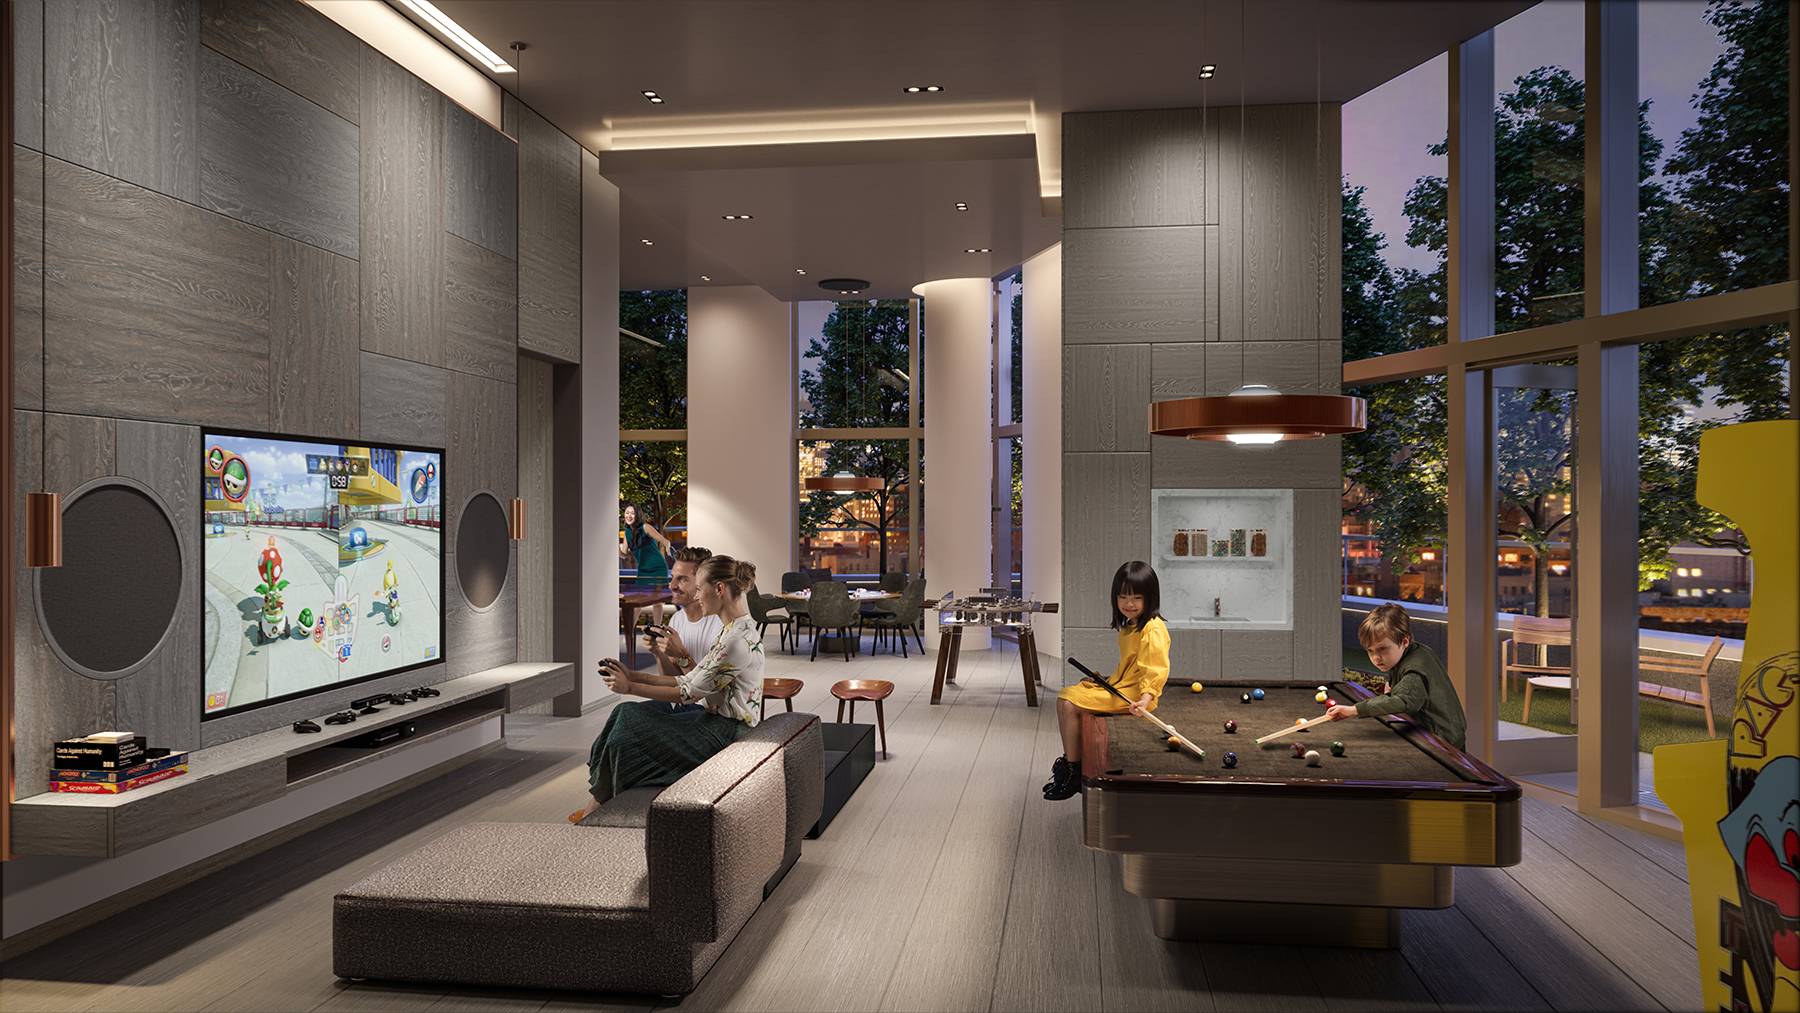 BROOKLYN POINT OFFERS ONE OF THE LAST 25 YEAR TAX ABATEMENTS AVAILABLE IN NEW YORK CITY Extell Development Company presents Brooklyn Point, a new standard of luxury living in Downtown ...